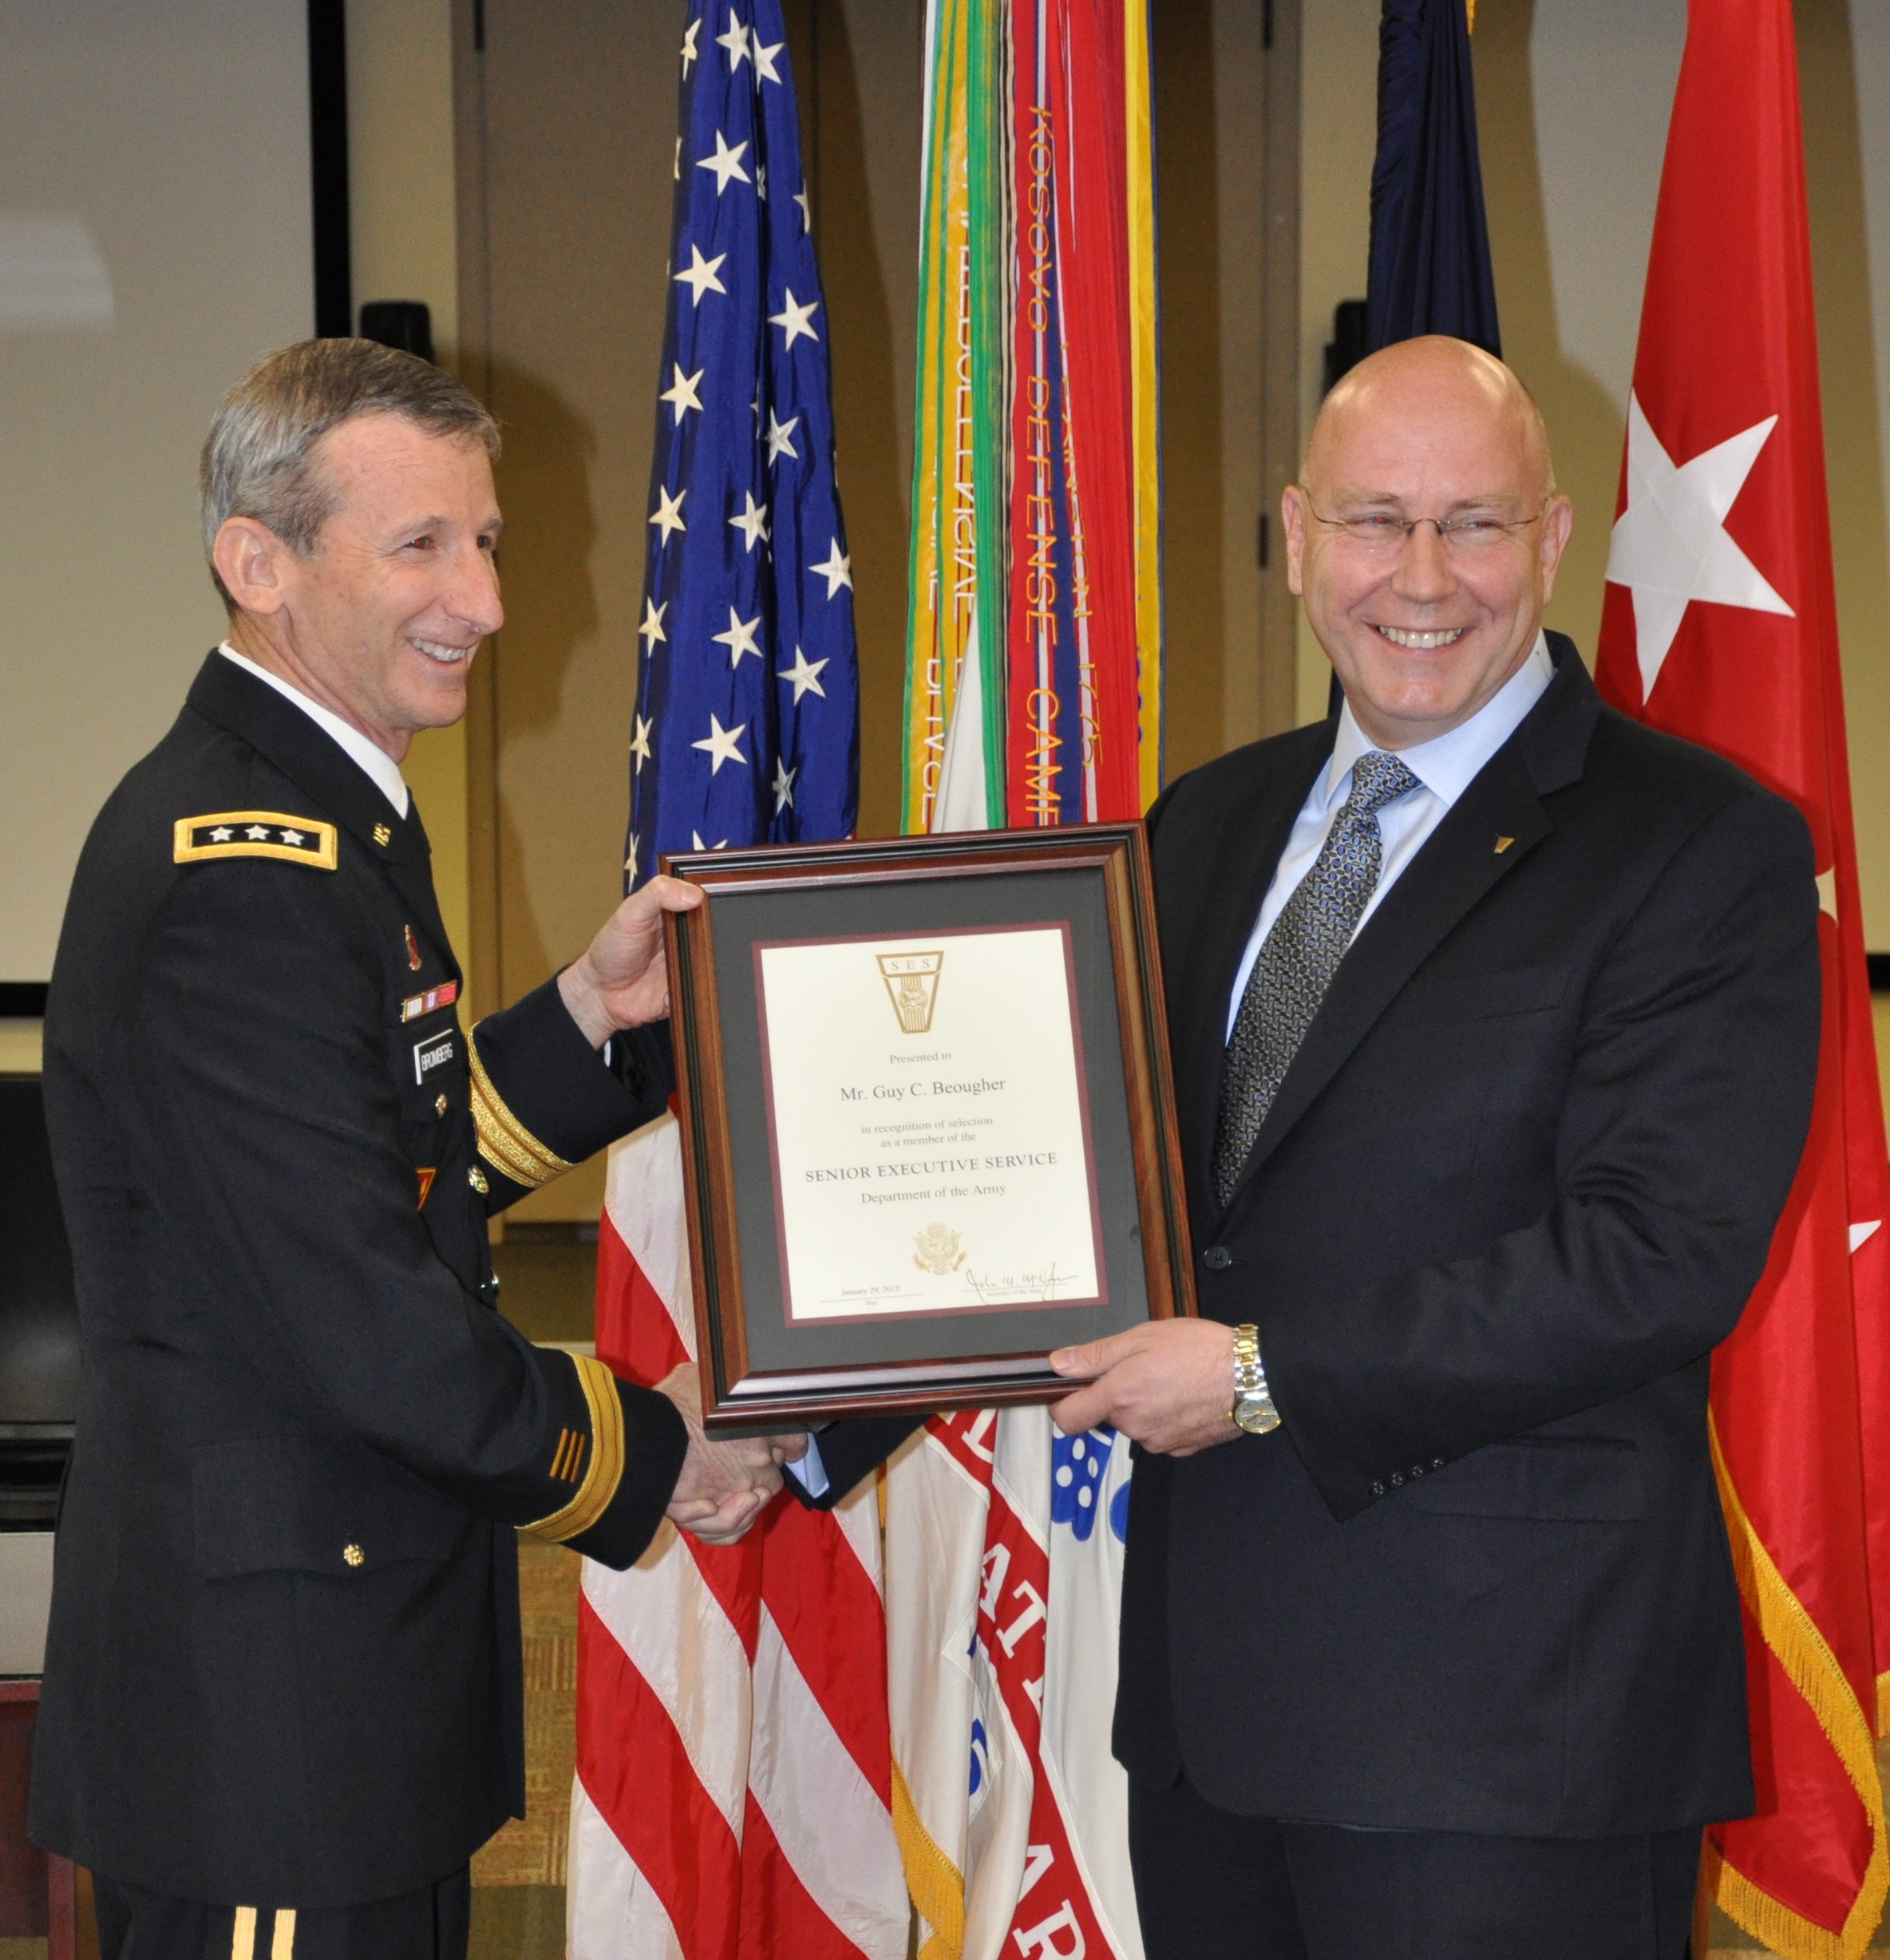 New senior Army civilian joins Executive Service ranks Article The